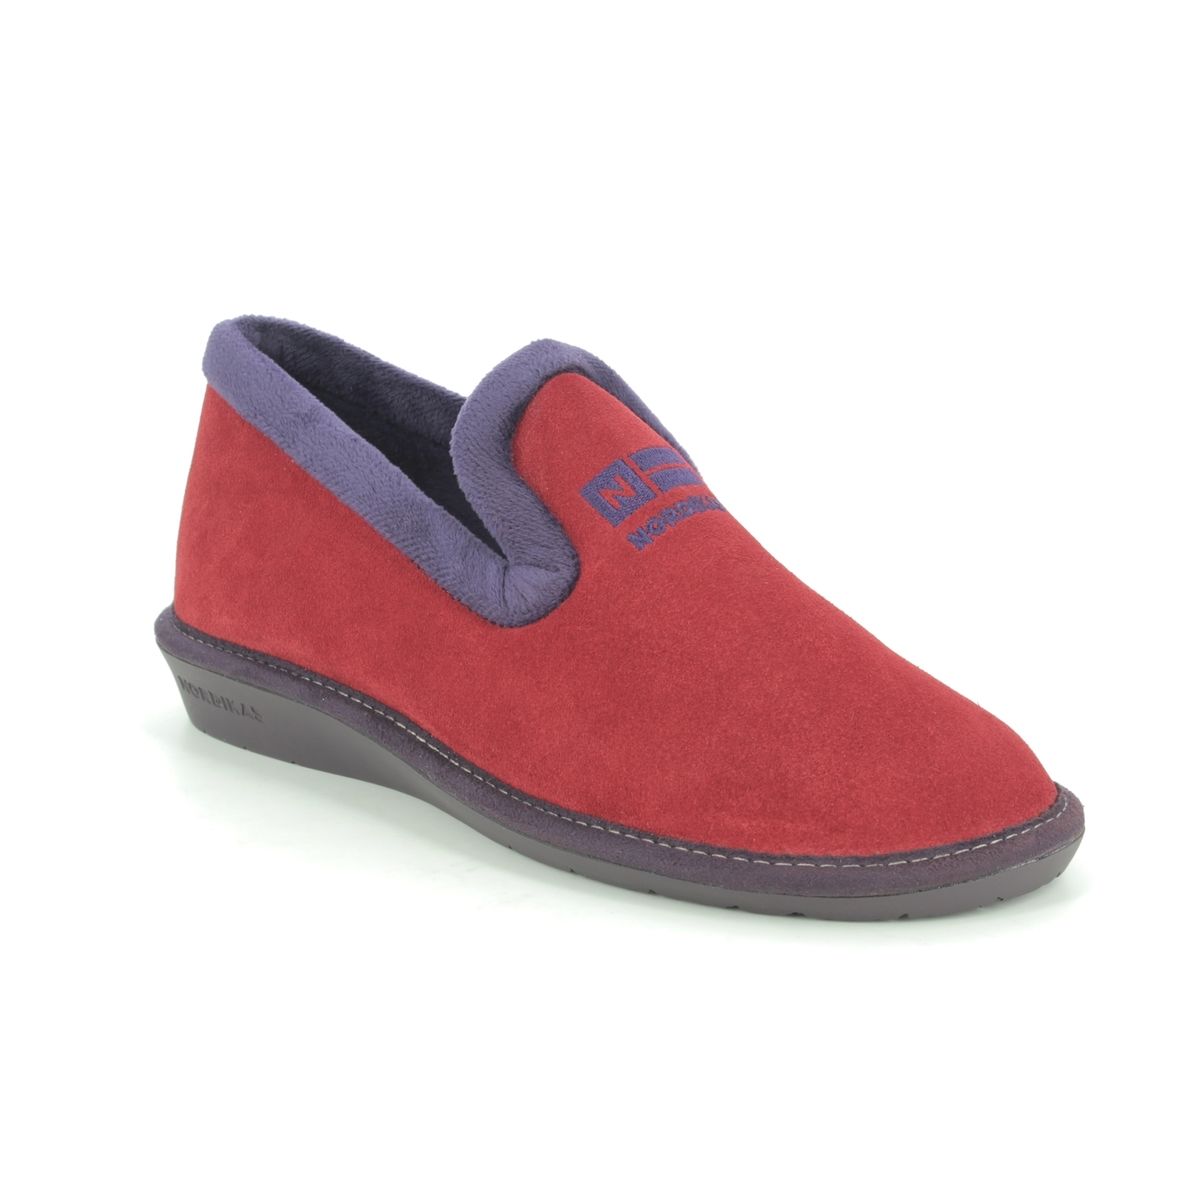 Nordikas Tabackin Red Suede Womens Slippers 305-4   Nicola 3 In Size 42 In Plain Red Suede